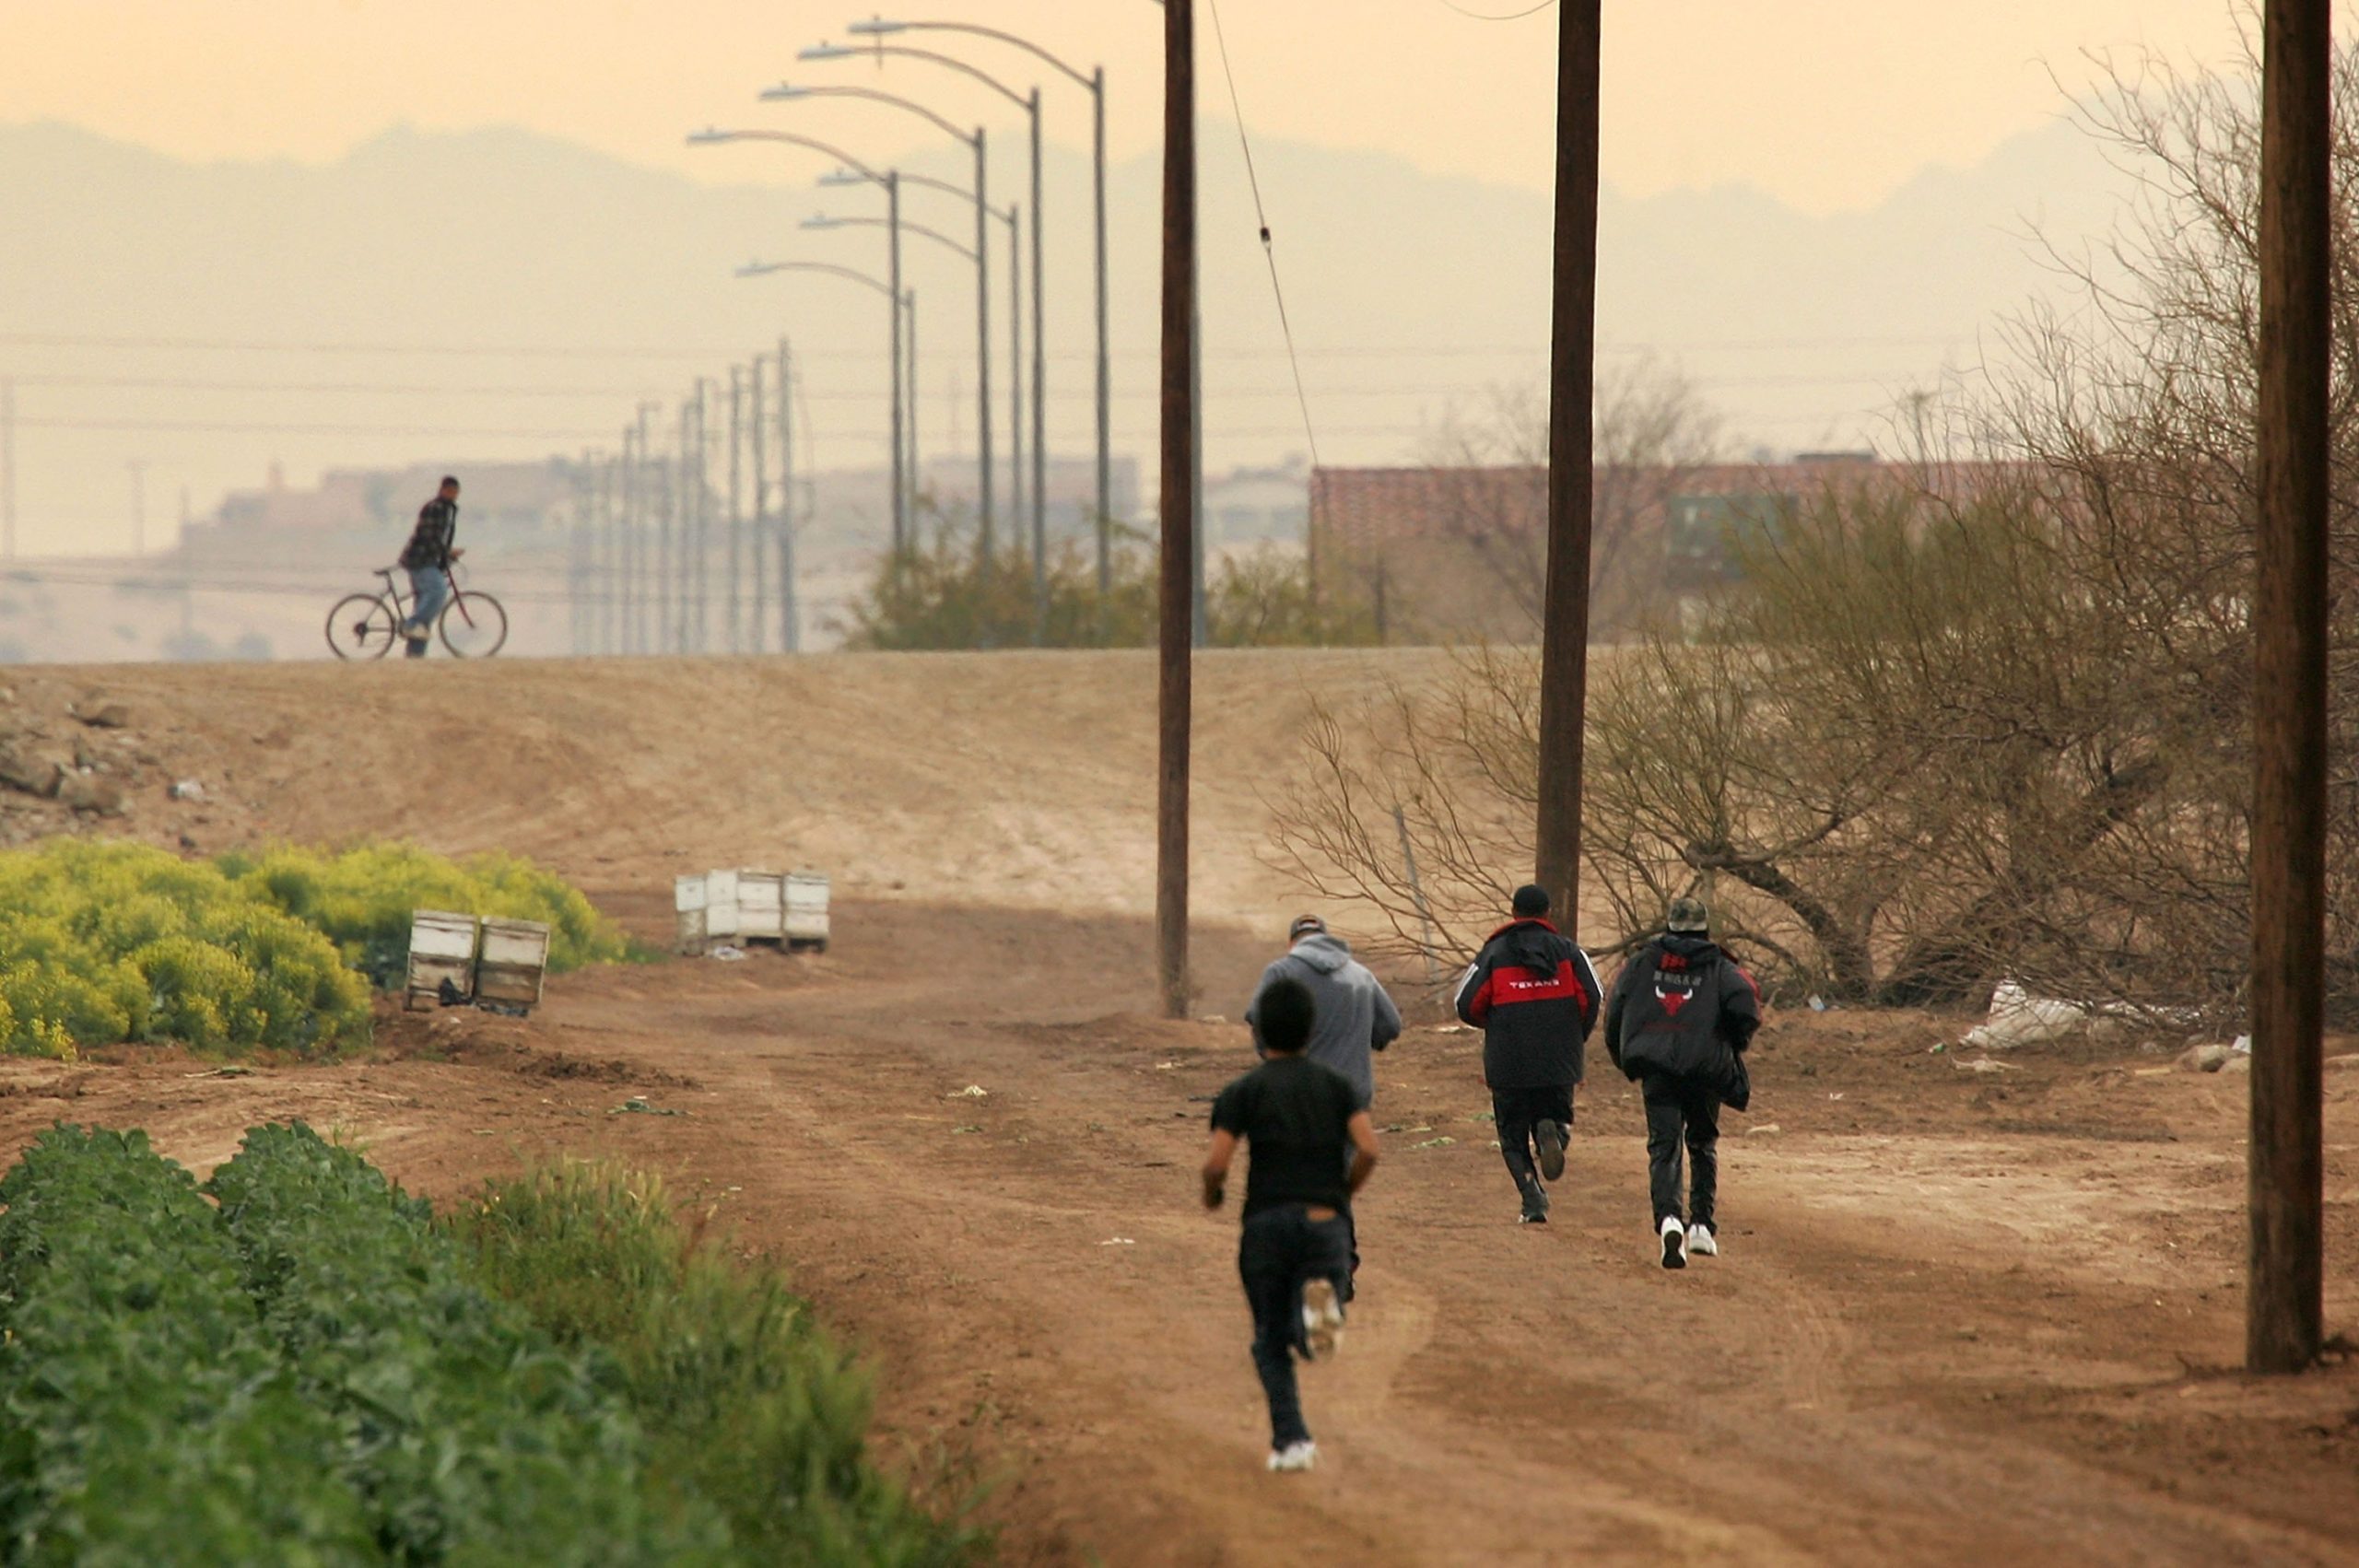 YUMA, AZ - MARCH 16: Men run after crossing illegally into the U.S. from Mexico on March 16, 2006 at the border town of near San Luis, south of Yuma, Arizona. As Congress begins a new battle over immigration policy, U.S. Customs and Border Protection (CBP) border patrol agents in Arizona are struggling to control undocumented immigrants that were pushed into the region by the 1990's border crack-down in California called Operation Gatekeeper. A recent study by the Pew Hispanic Center, using Census Bureau data, estimates that the U.S. currently has an illegal immigrant population of 11.5 million to 12 million, about one-third of them arriving within the past 10 years. More than half are reportedly from Mexico. Ironically, beefed-up border patrols and increased security are reportedly having the unintended result of deterring many from returning to their country of origin. (Photo by David McNew/Getty Images)